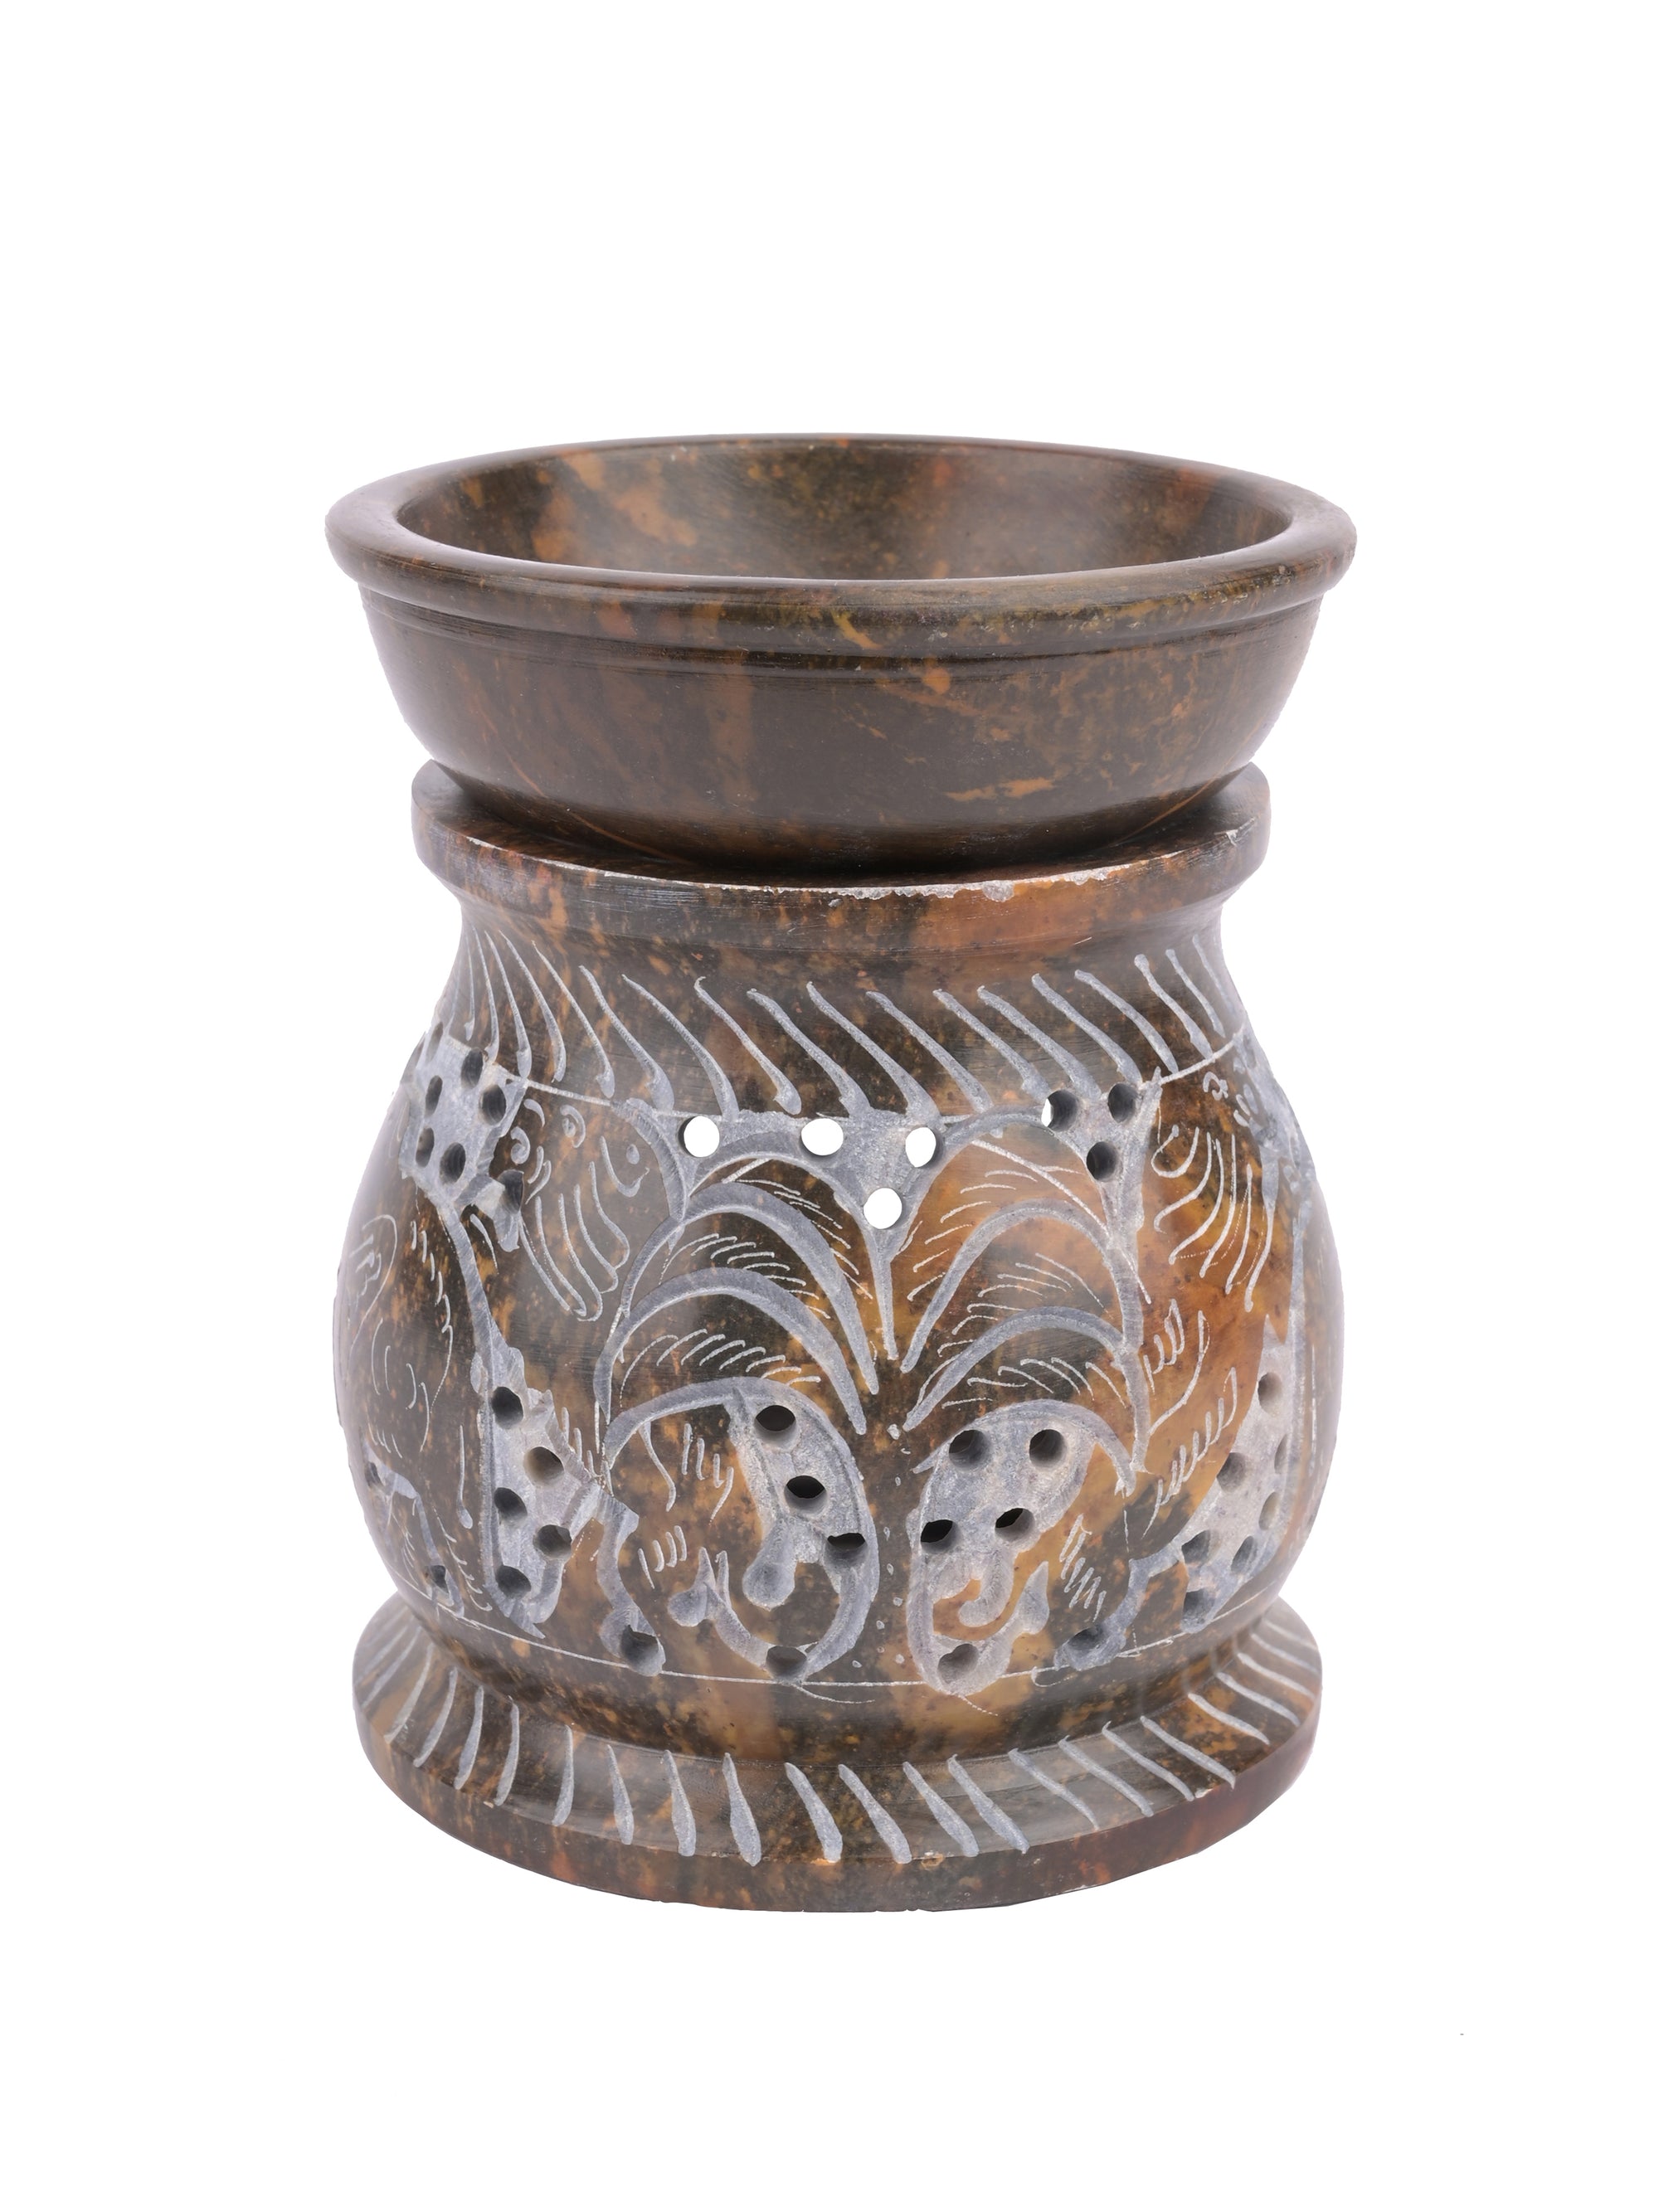 Soapstone carved Oil Burner Aroma Diffuser - 4 inches - The Heritage Artifacts